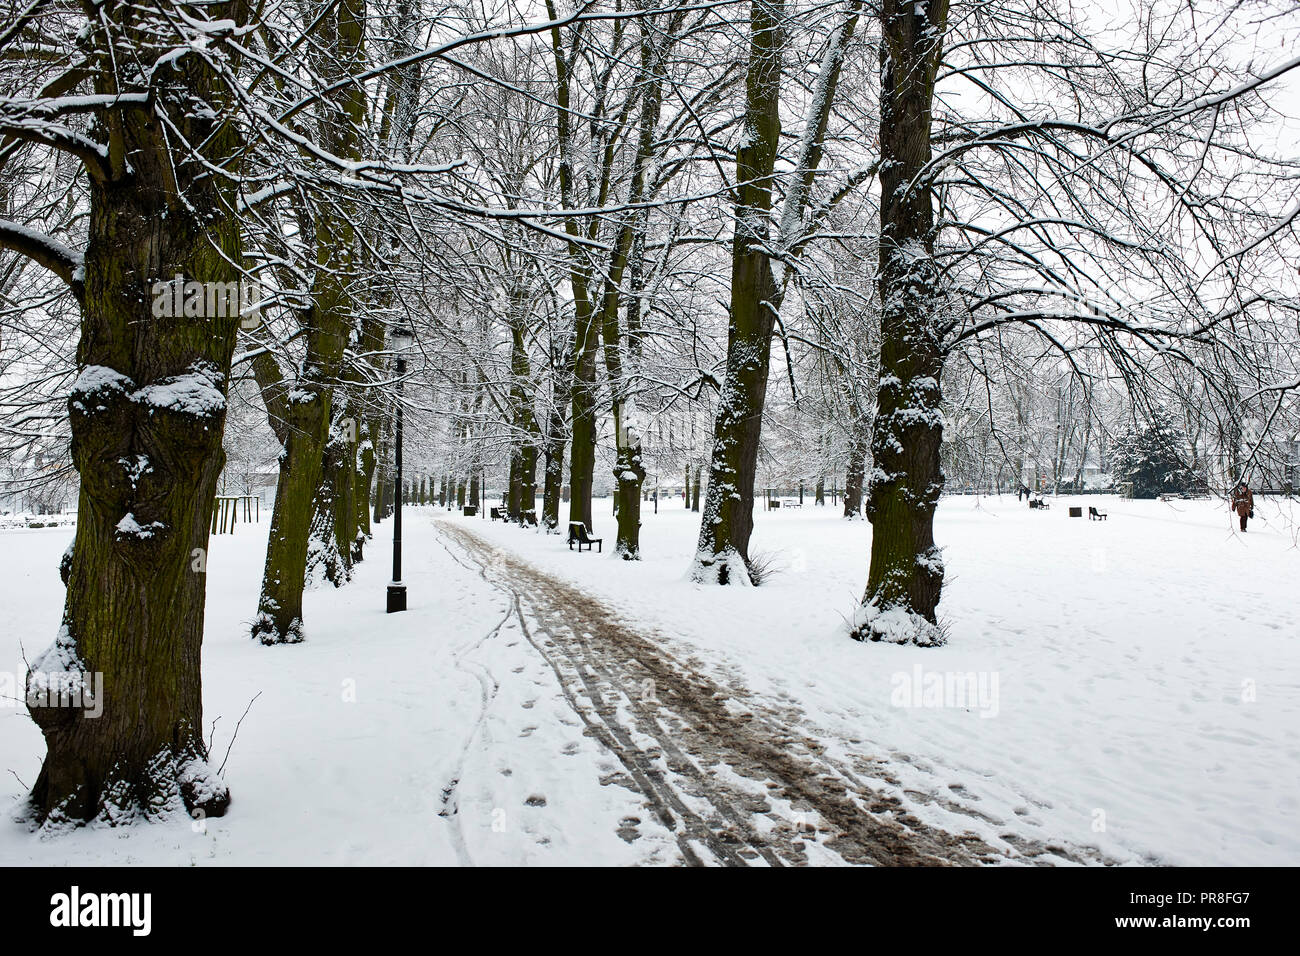 Winter Scene in Cambridge - Christ's Pieces. Snow covered lawn and garden with tree lined footpath. Stock Photo